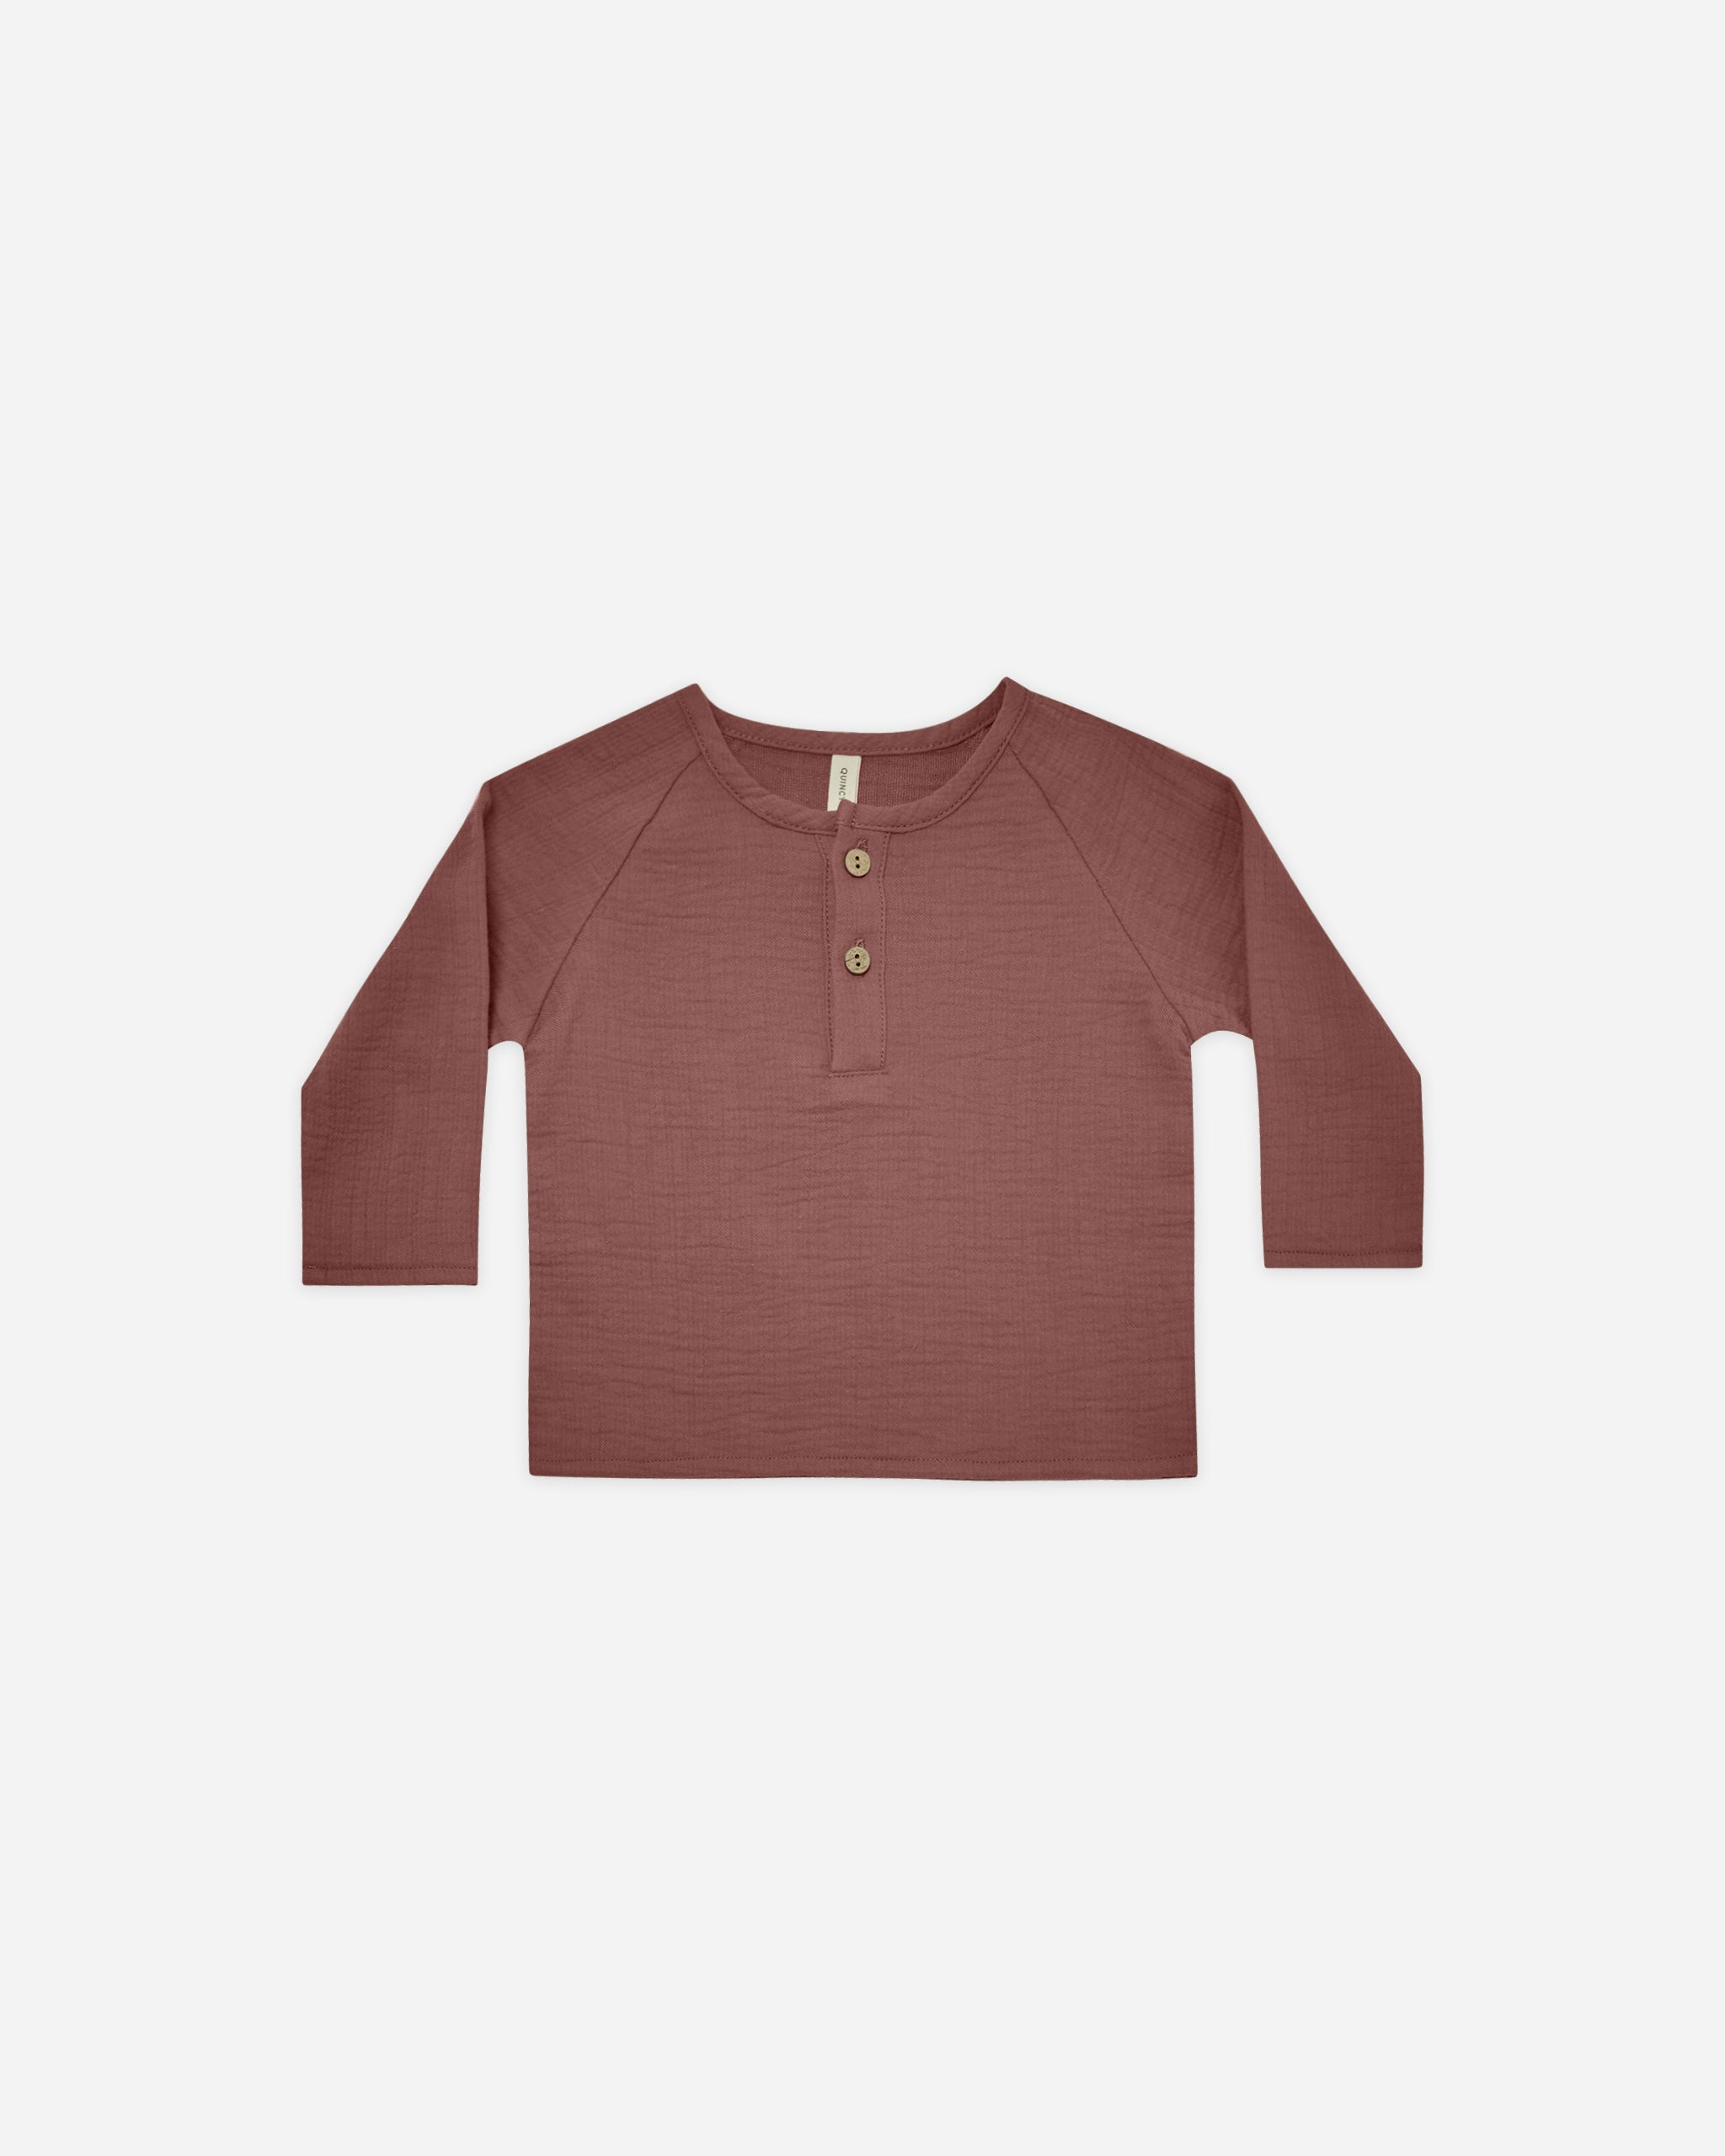 Zion Shirt || Plum - Rylee + Cru | Kids Clothes | Trendy Baby Clothes | Modern Infant Outfits |